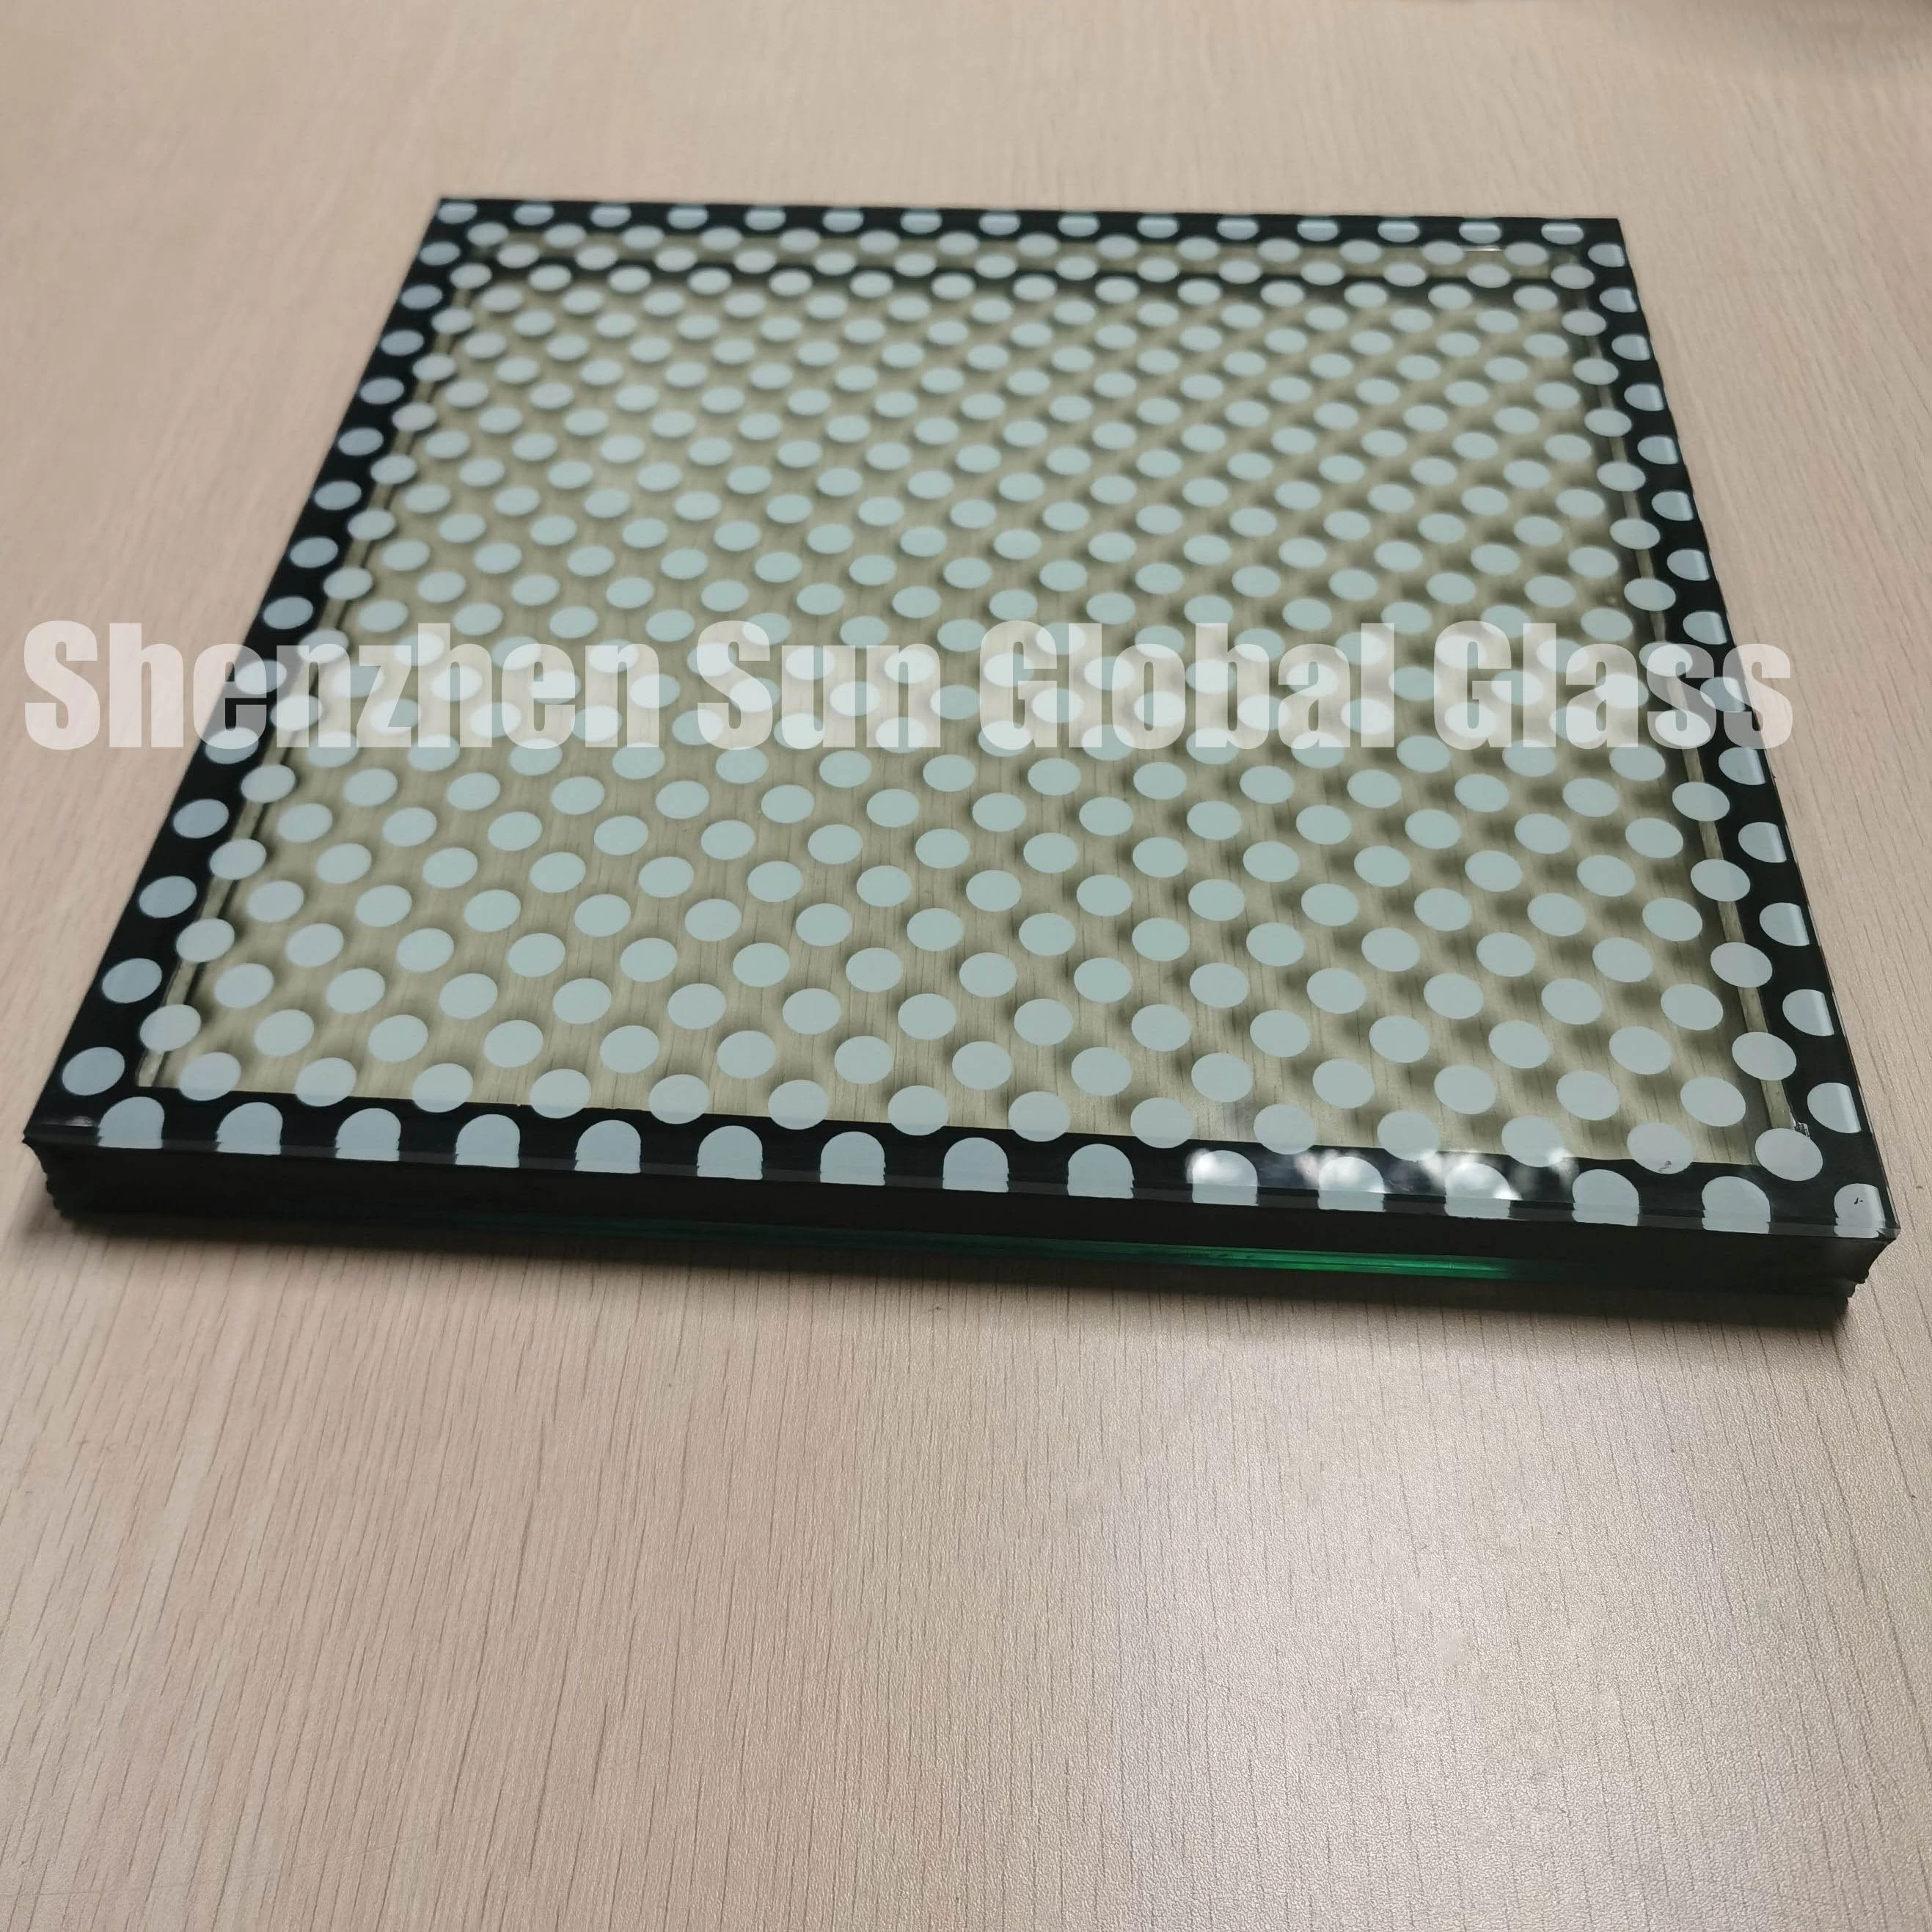 8mm low iron printed tempered glass+12A+11.52mm low iron tempered laminated glass, 31.52mm ultra clear tempered glass with dots printing IGU, 8mm extra clear printed toughened glass+12mm spacer+55.4 extra clear ESG VSG double glazing